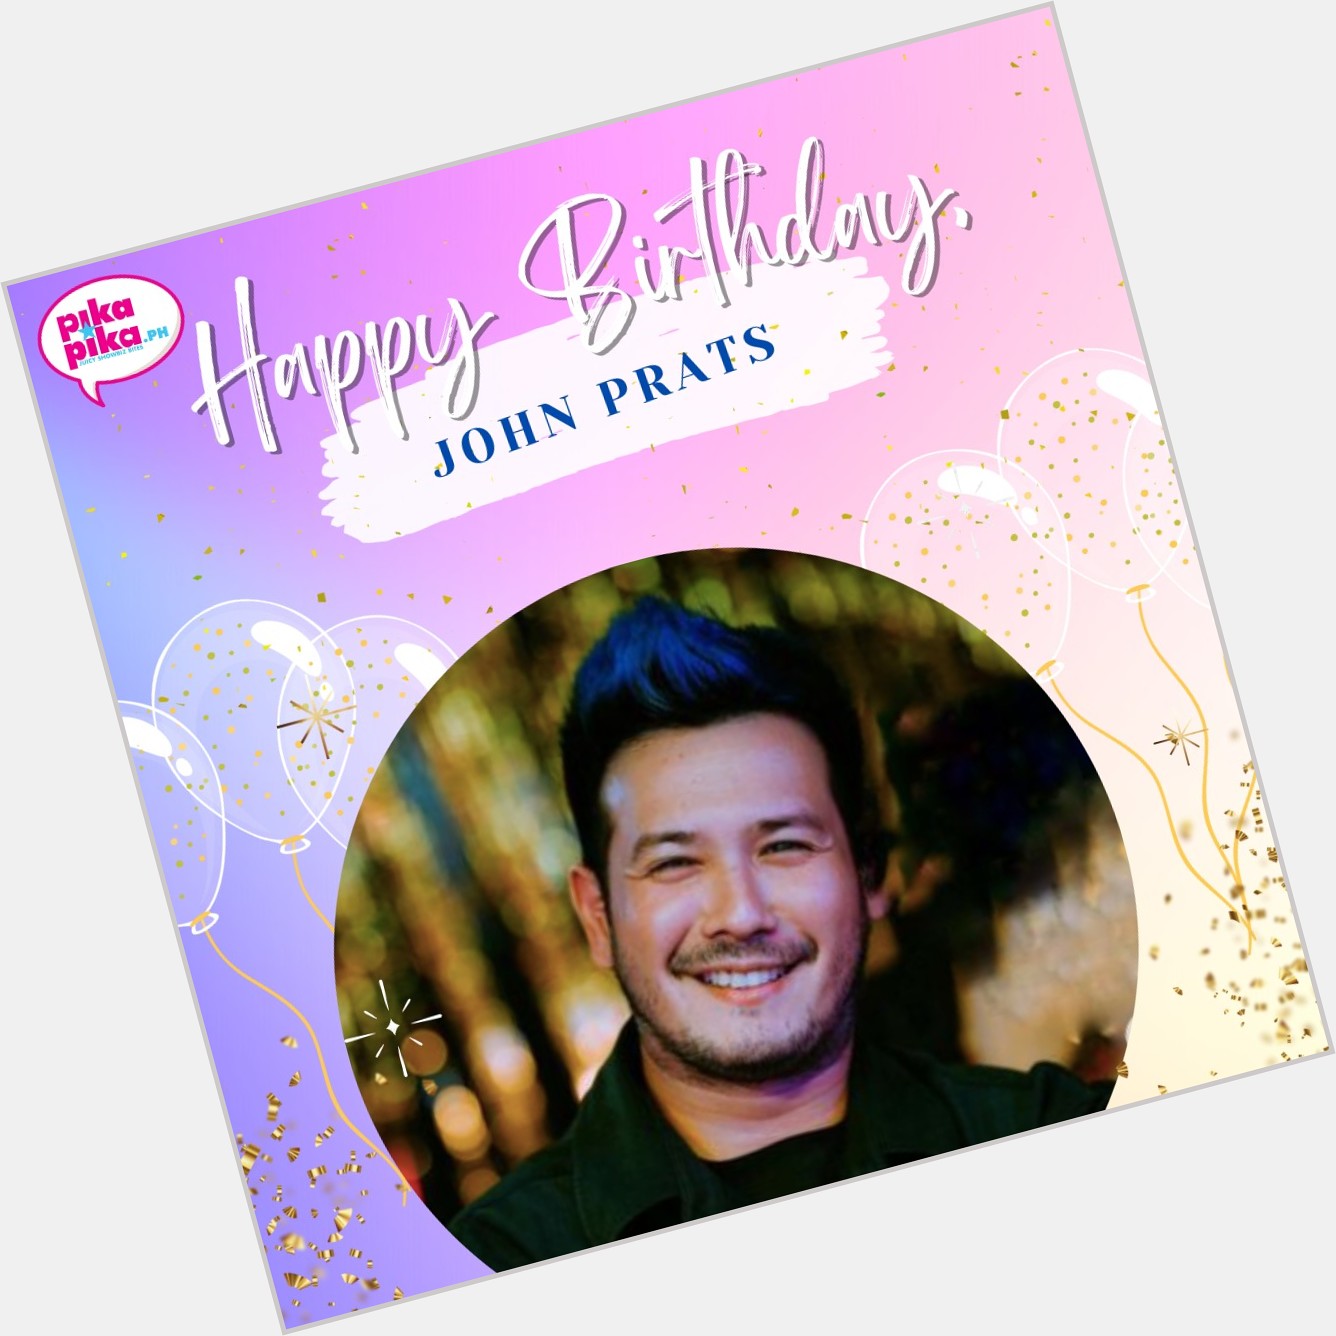 Happy birthday, John Prats! May your special day be filled with love and cheers.    